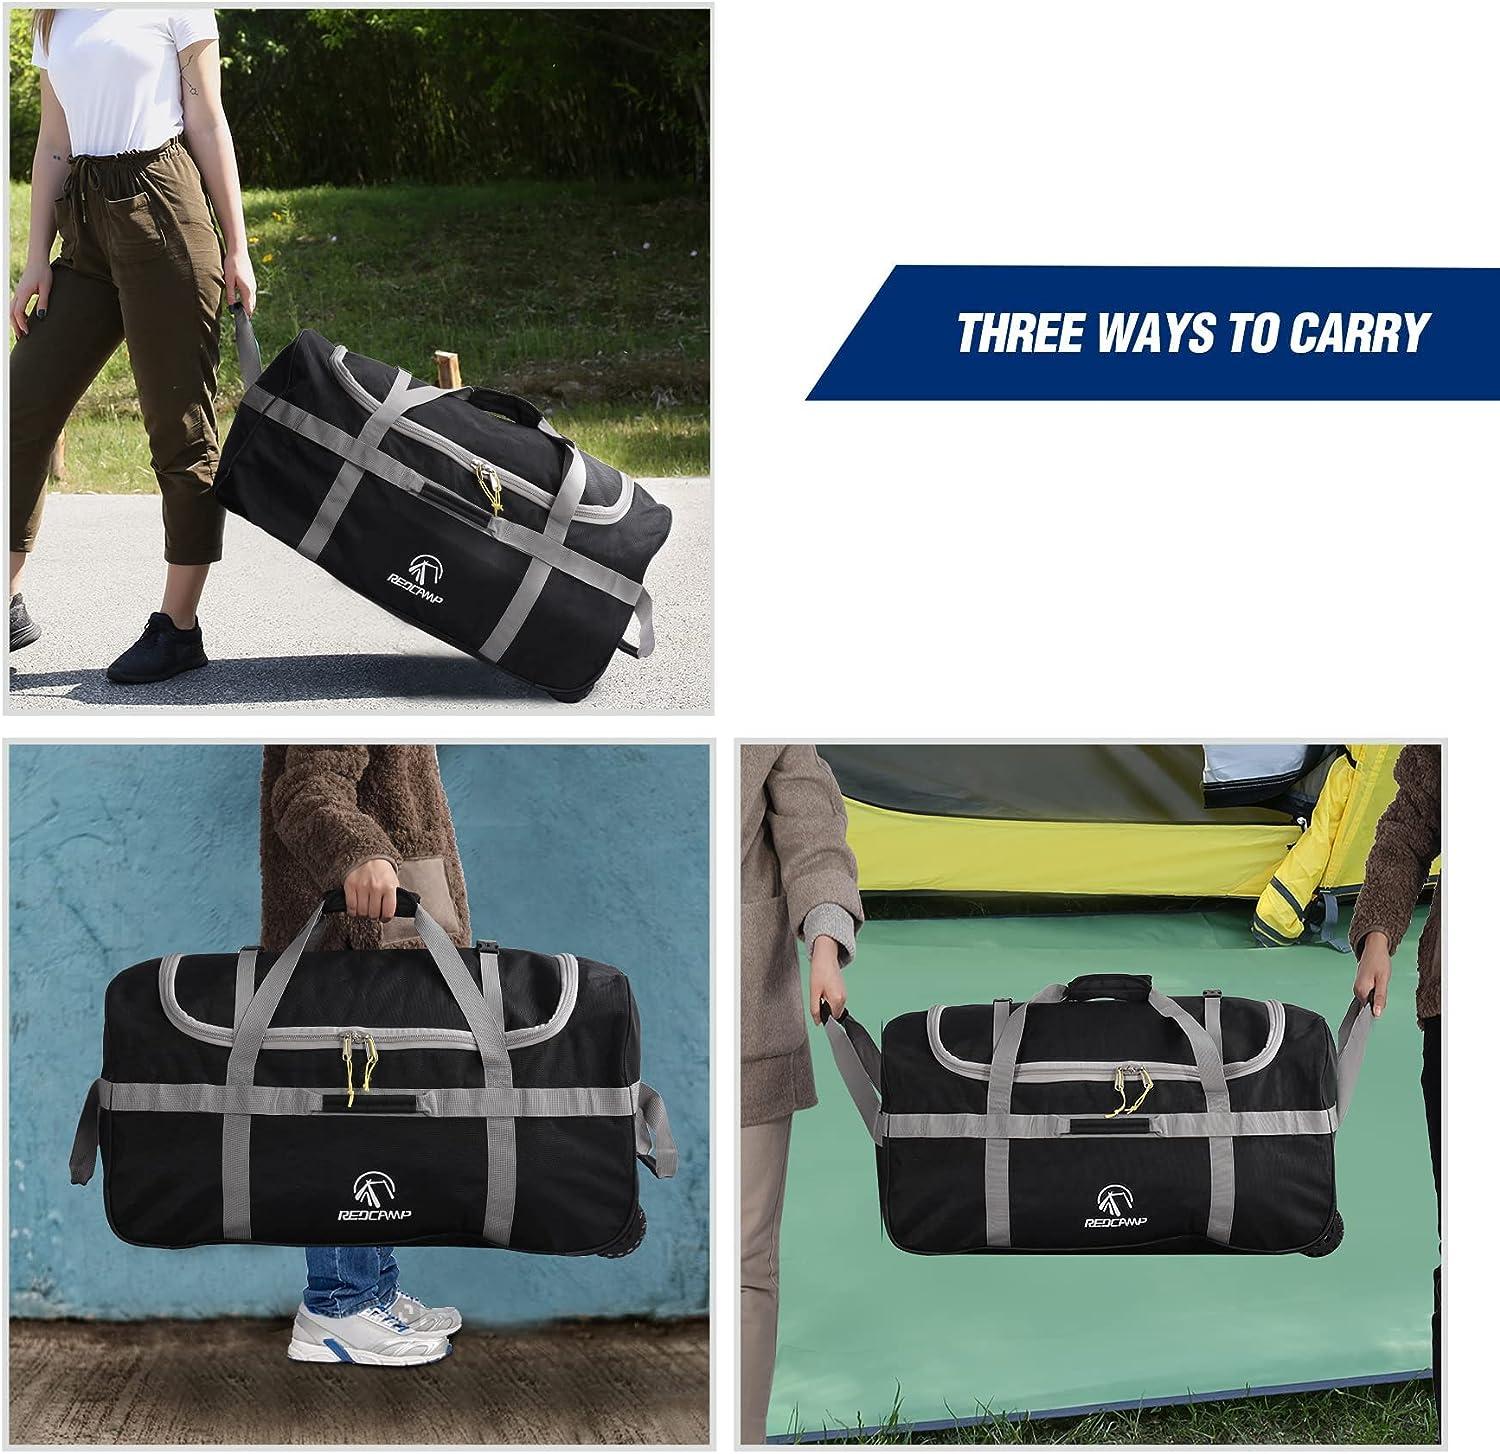 in Travel Foldable Holdall Luggage Bag with Plastic Wheels, Lightweight